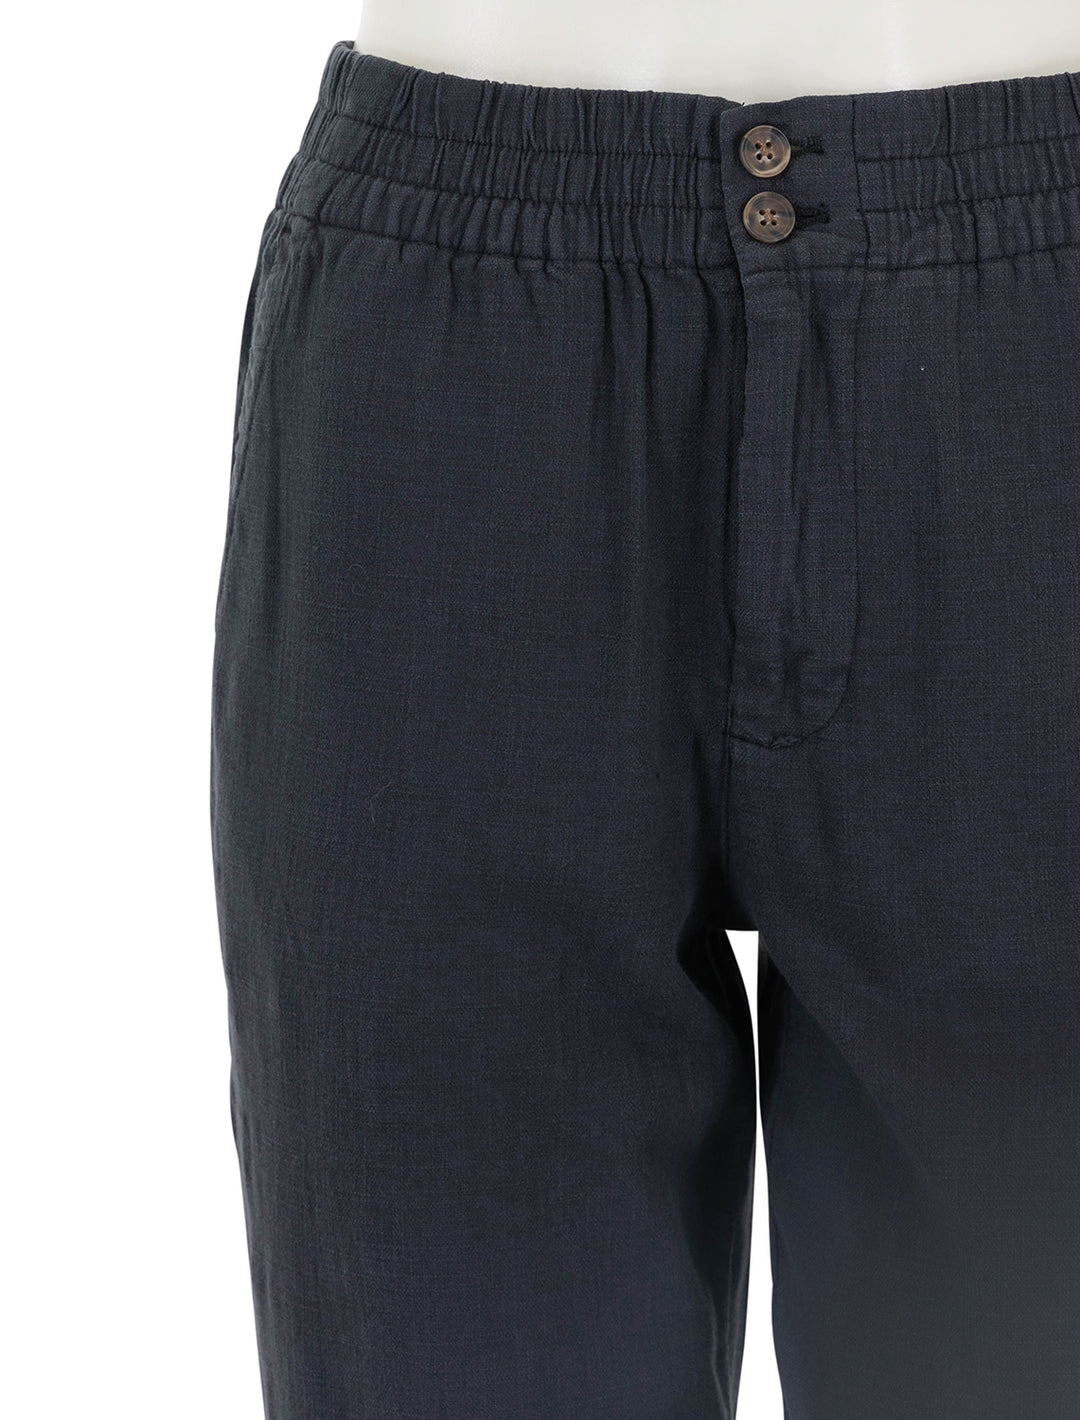 Close-up view of Marine Layer's elle pant in phantom.